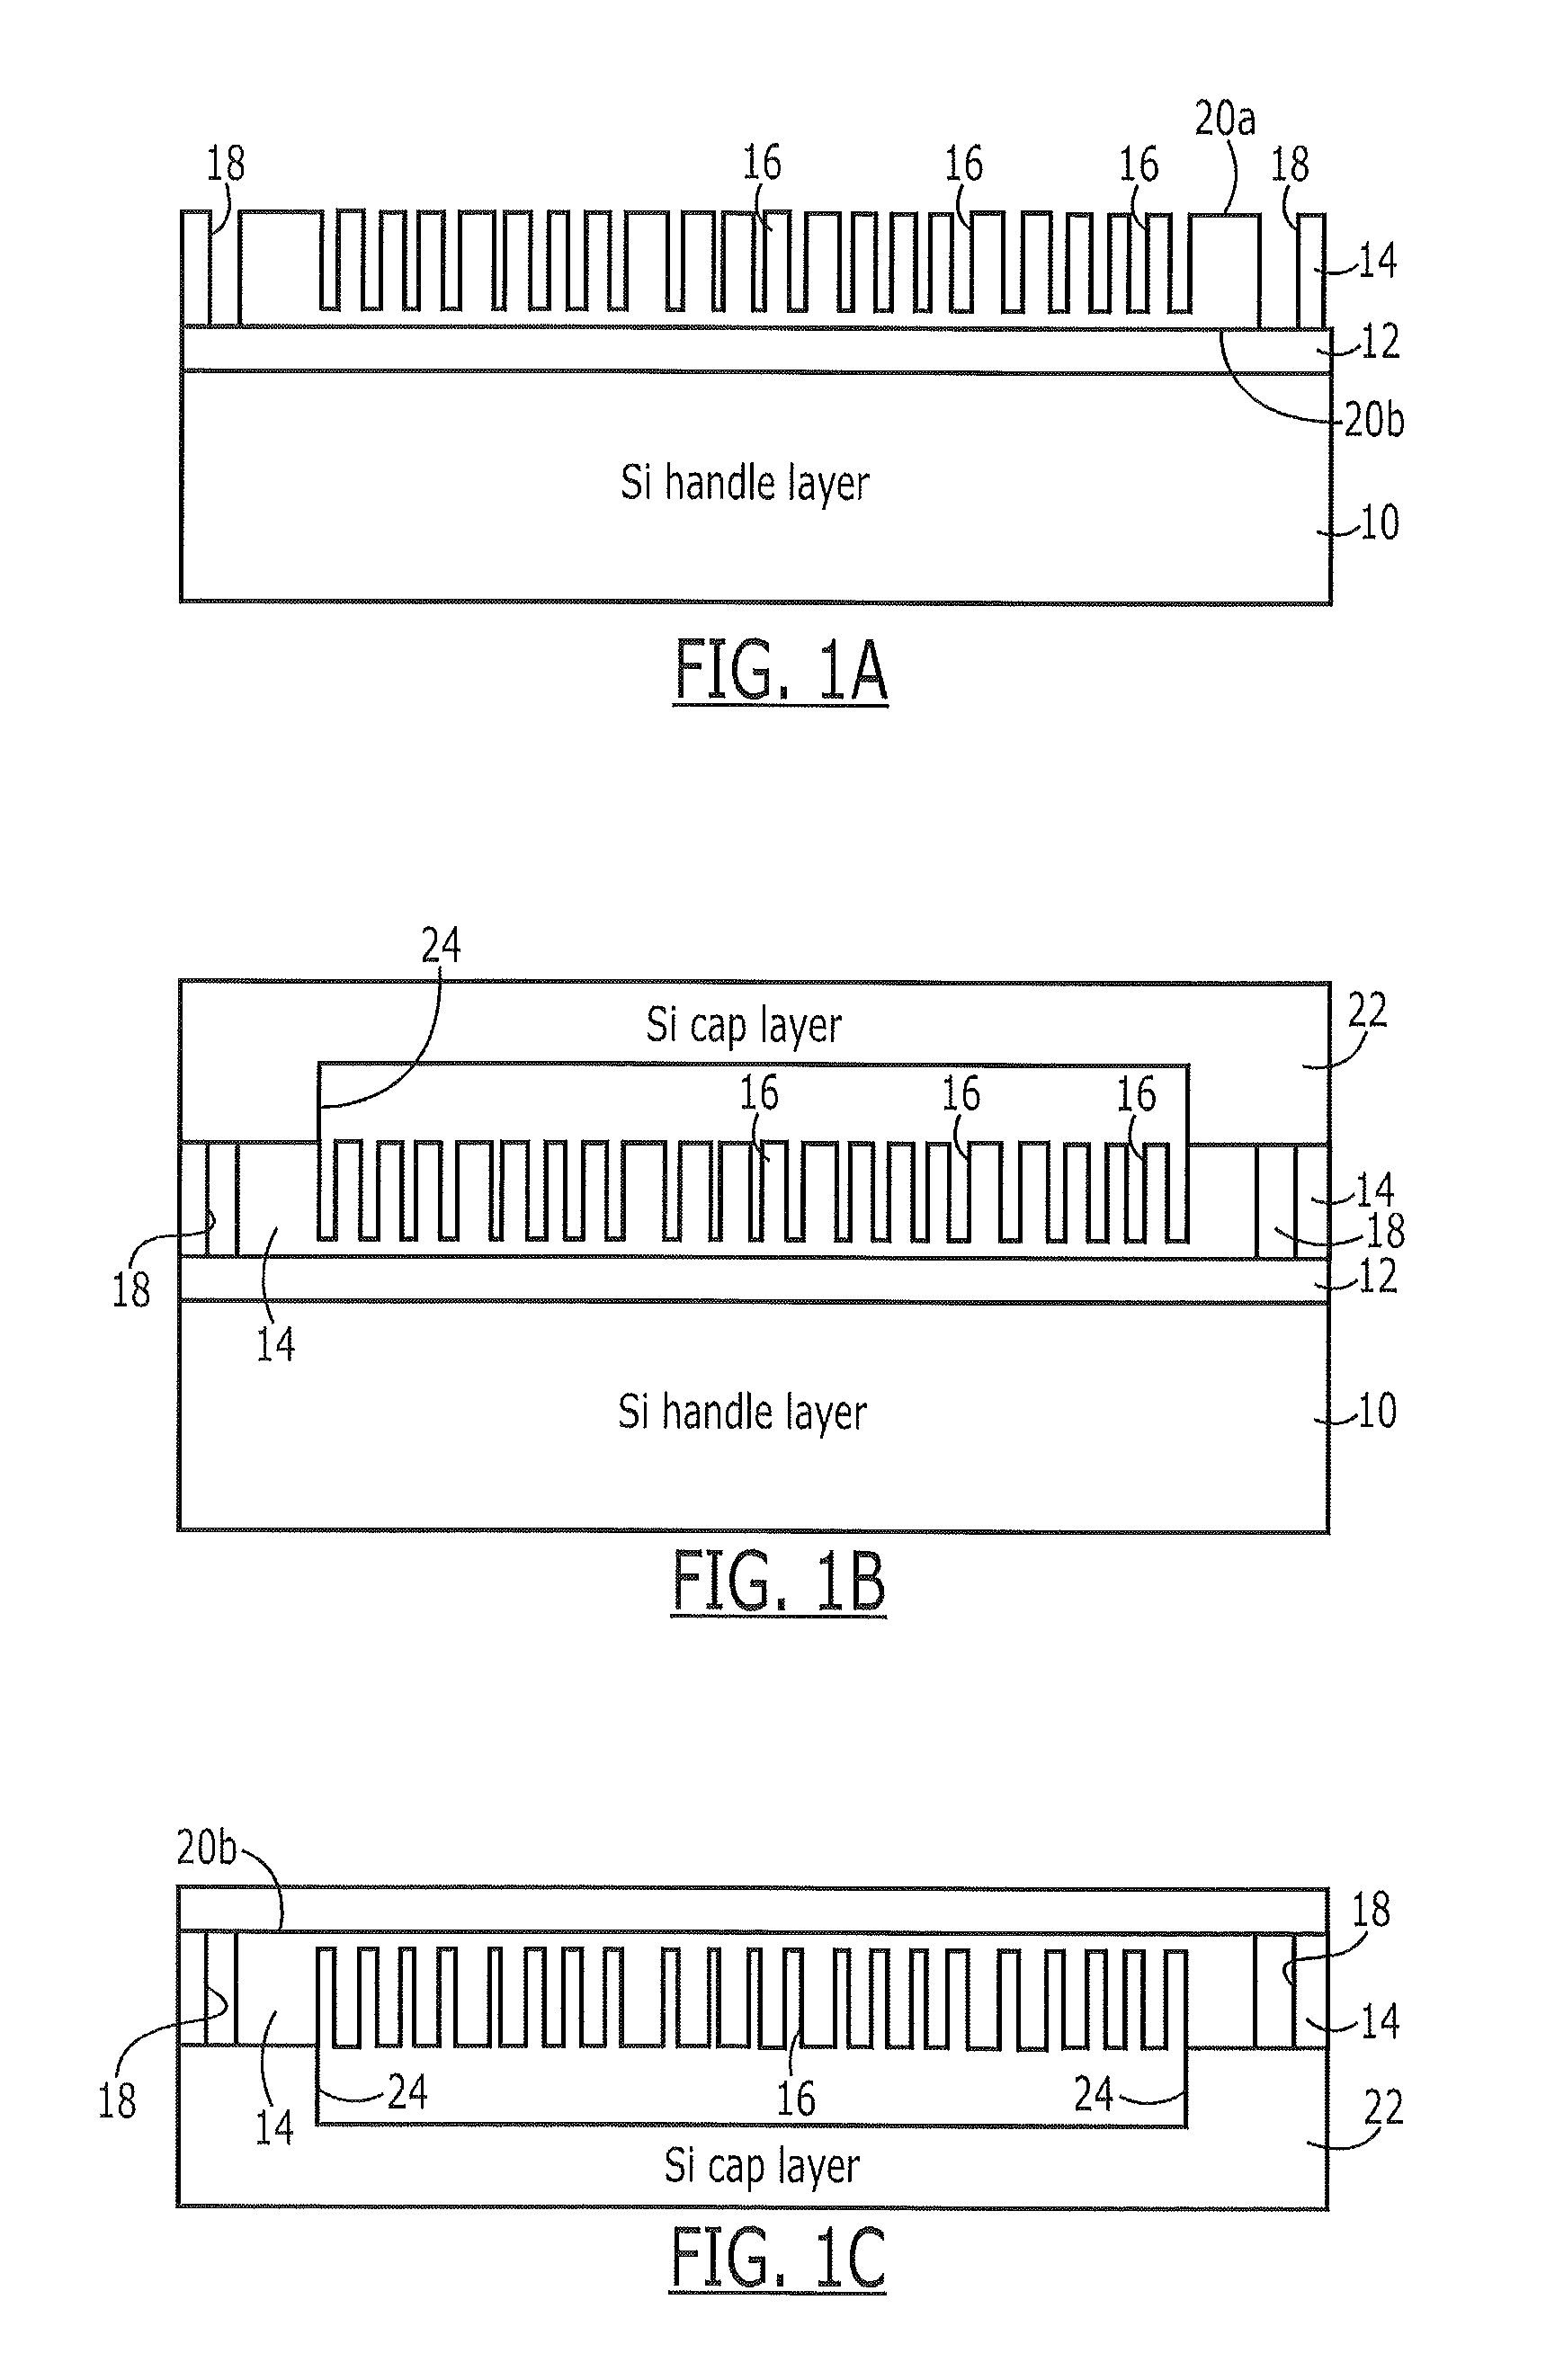 Methods of forming microdevice substrates using double-sided alignment techniques